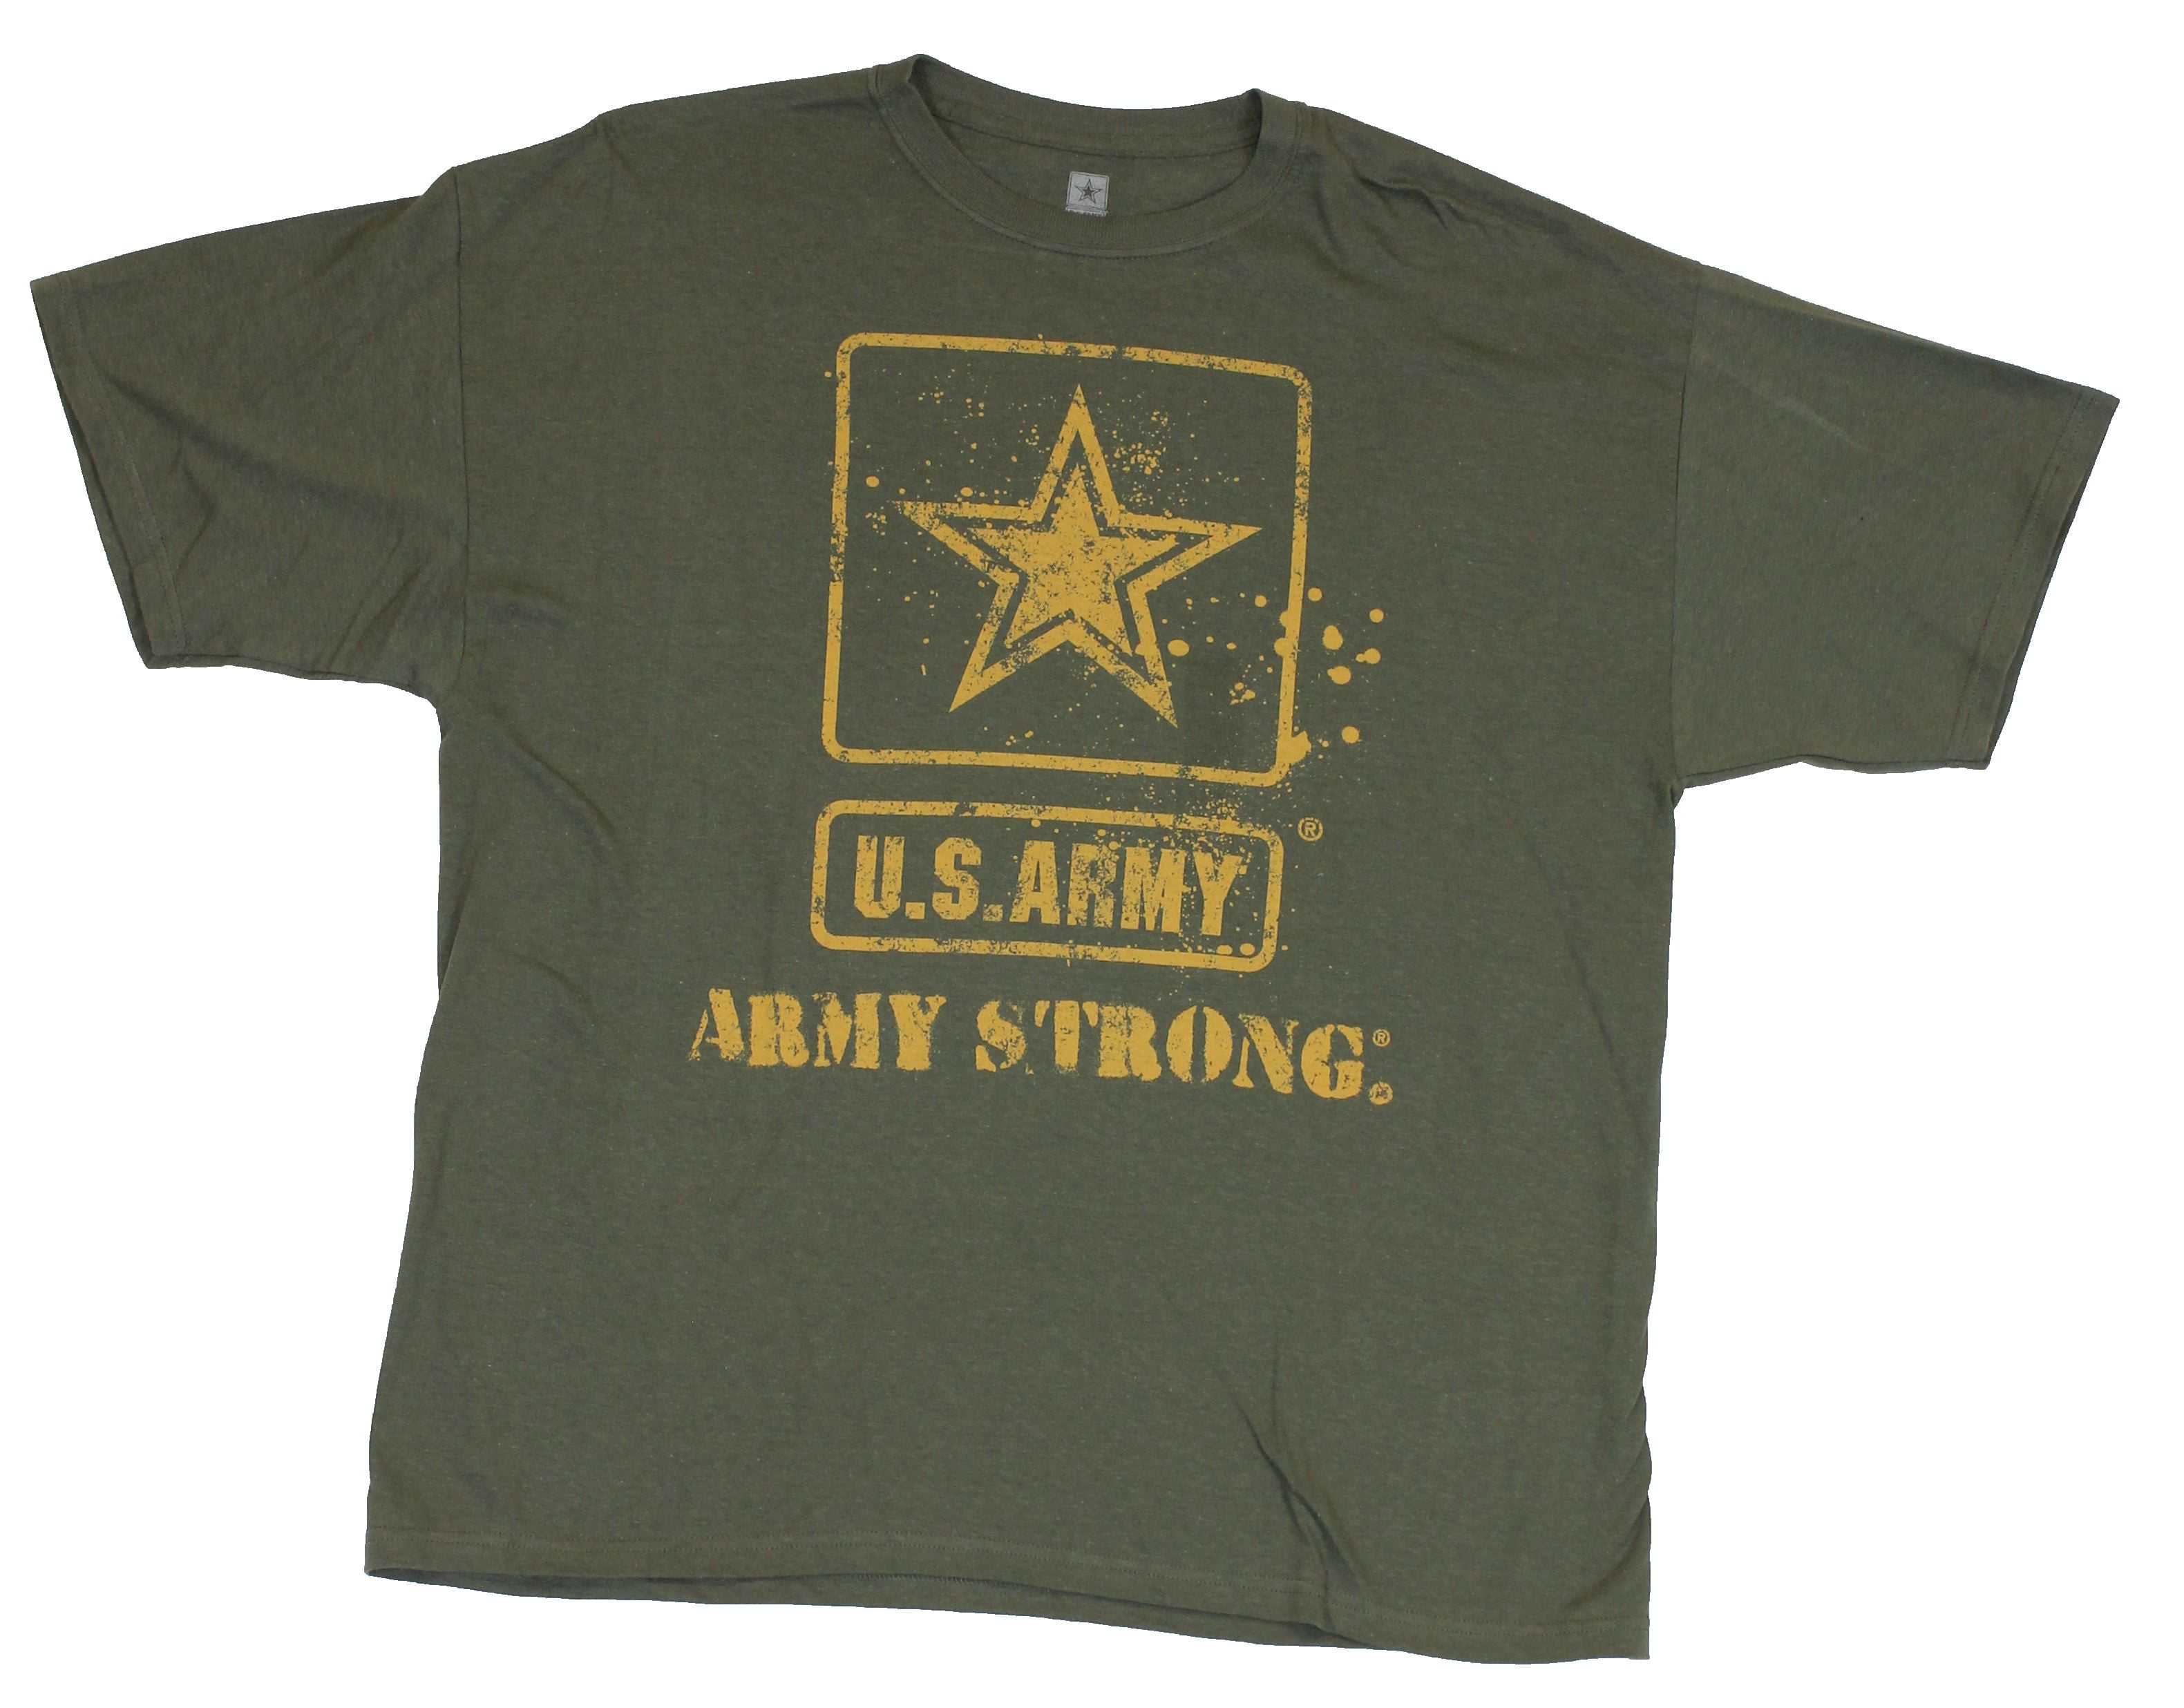 Army - Army US Army Mens T-Shirt - Army Strong Splatter Logo on Green ...